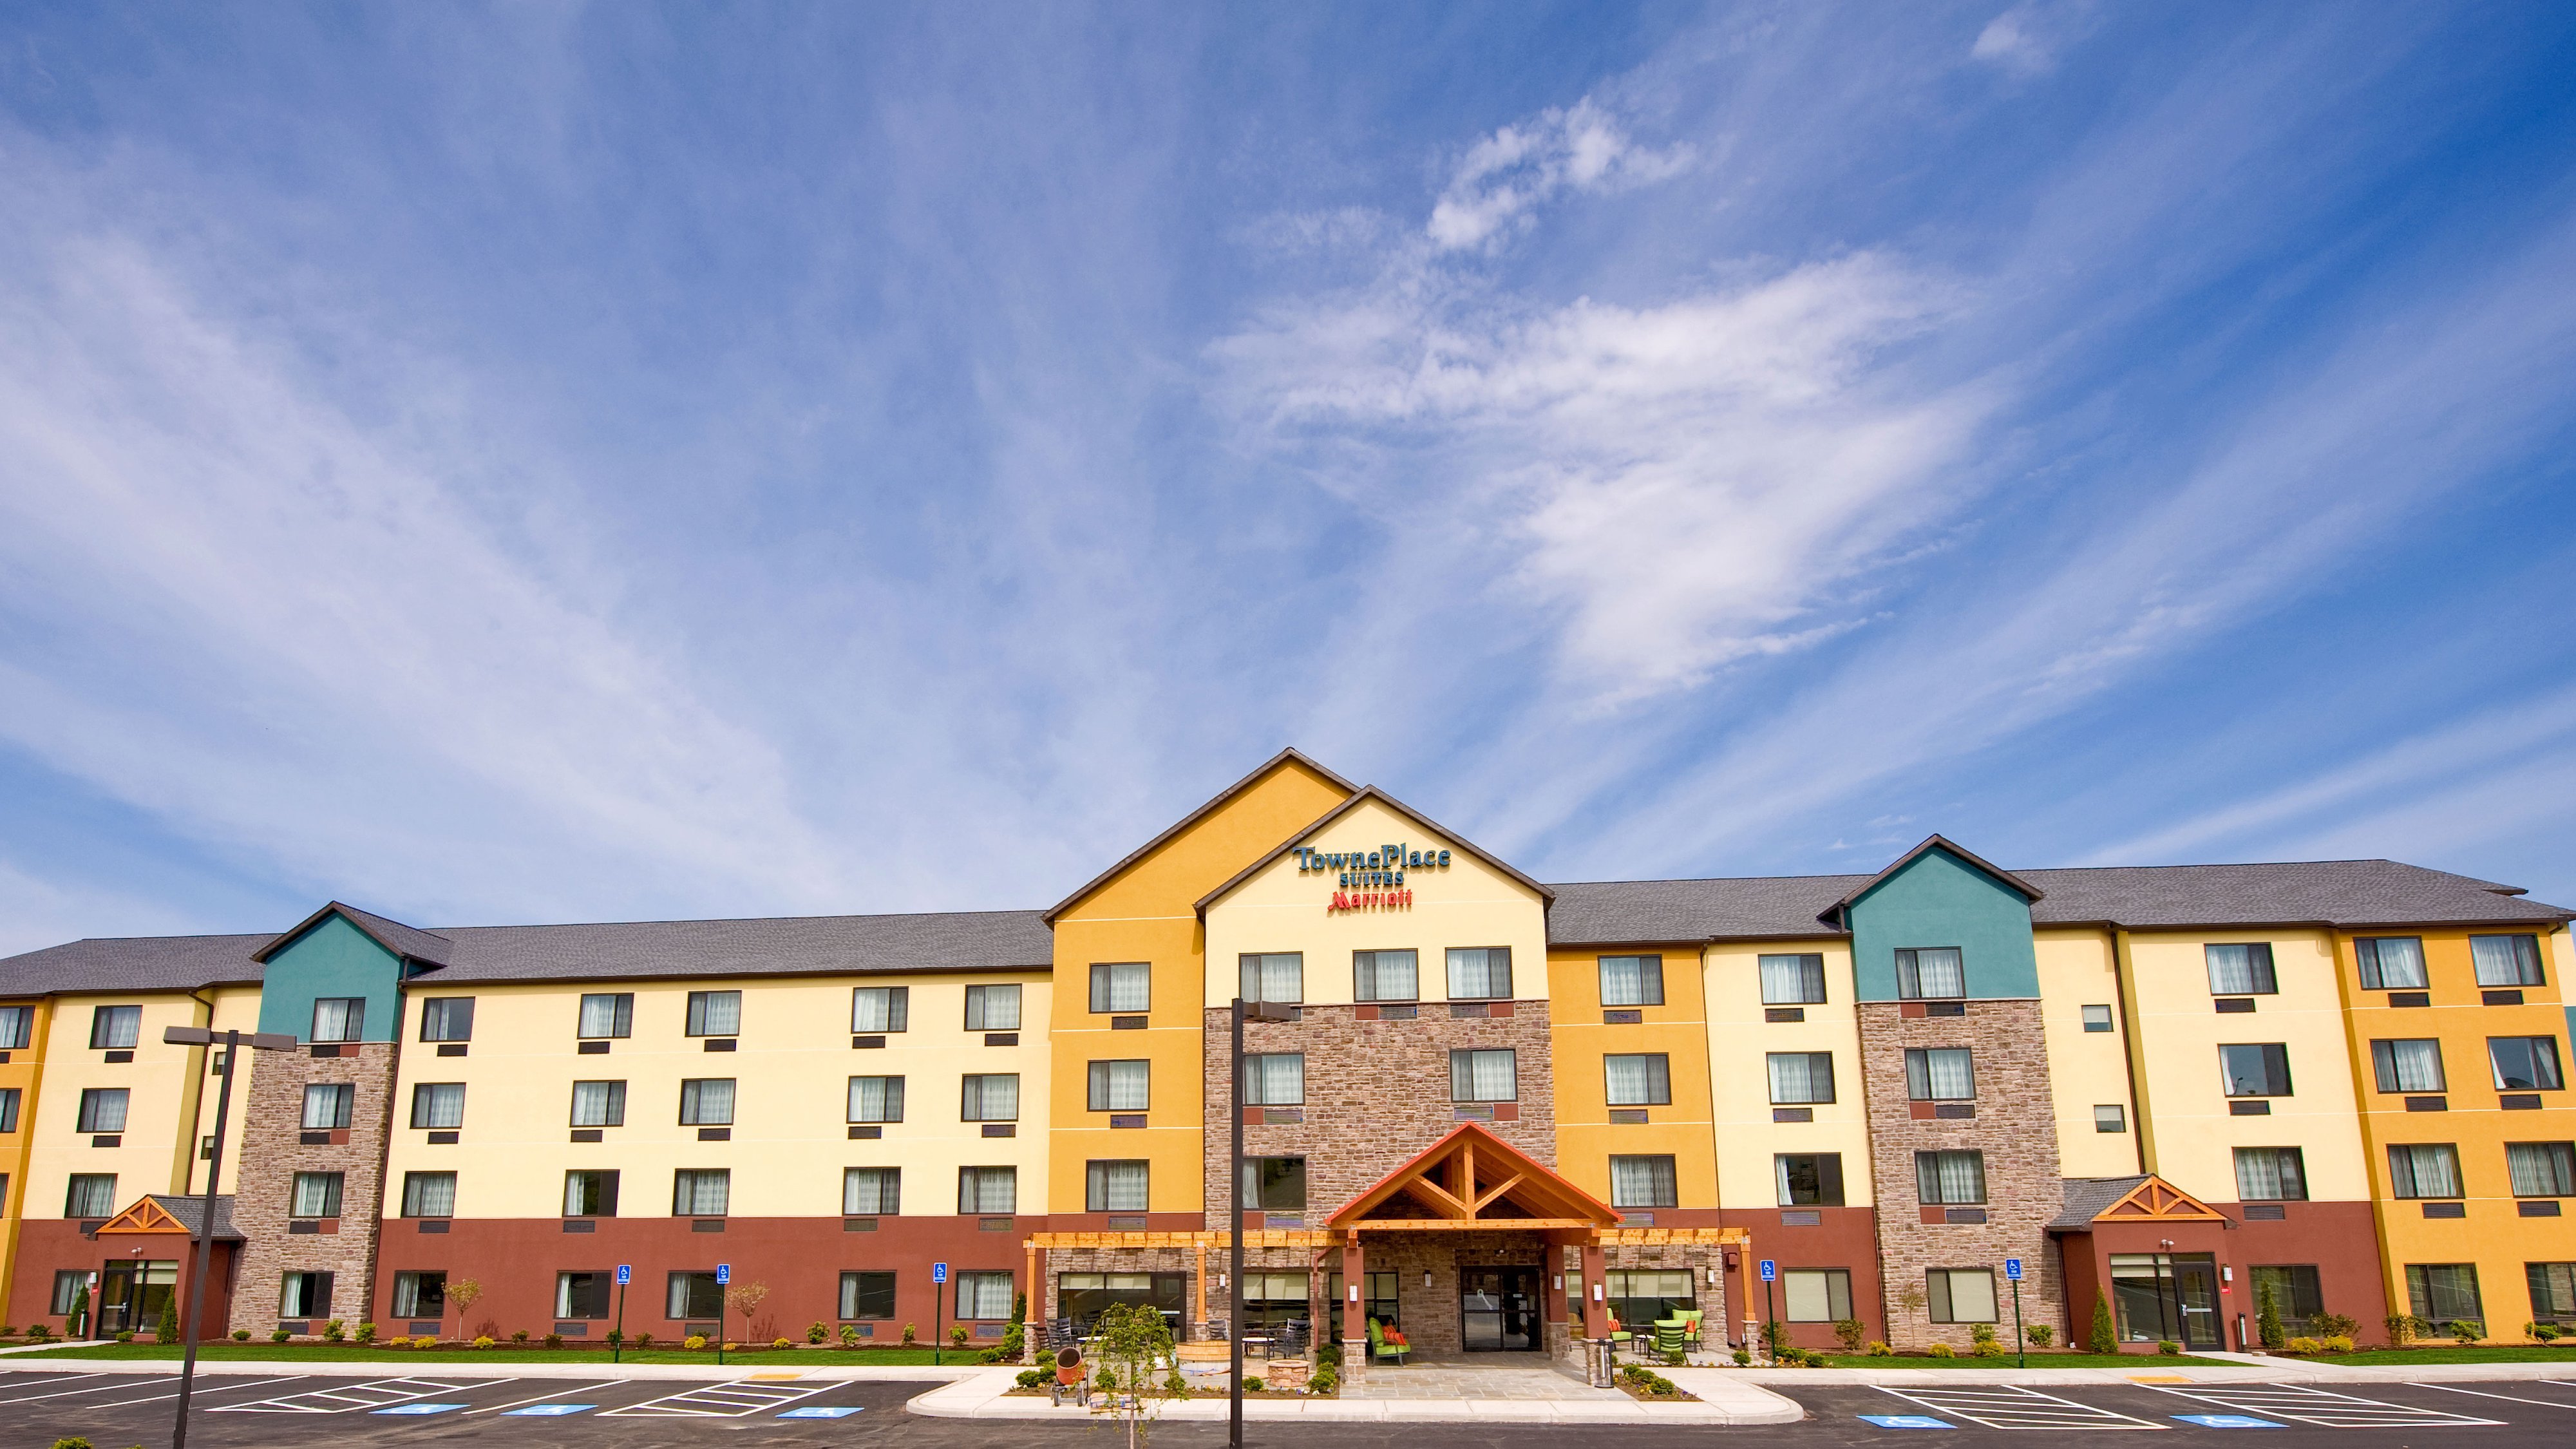 Photo of TownePlace Suites Scranton Wilkes-Barre, Moosic, PA